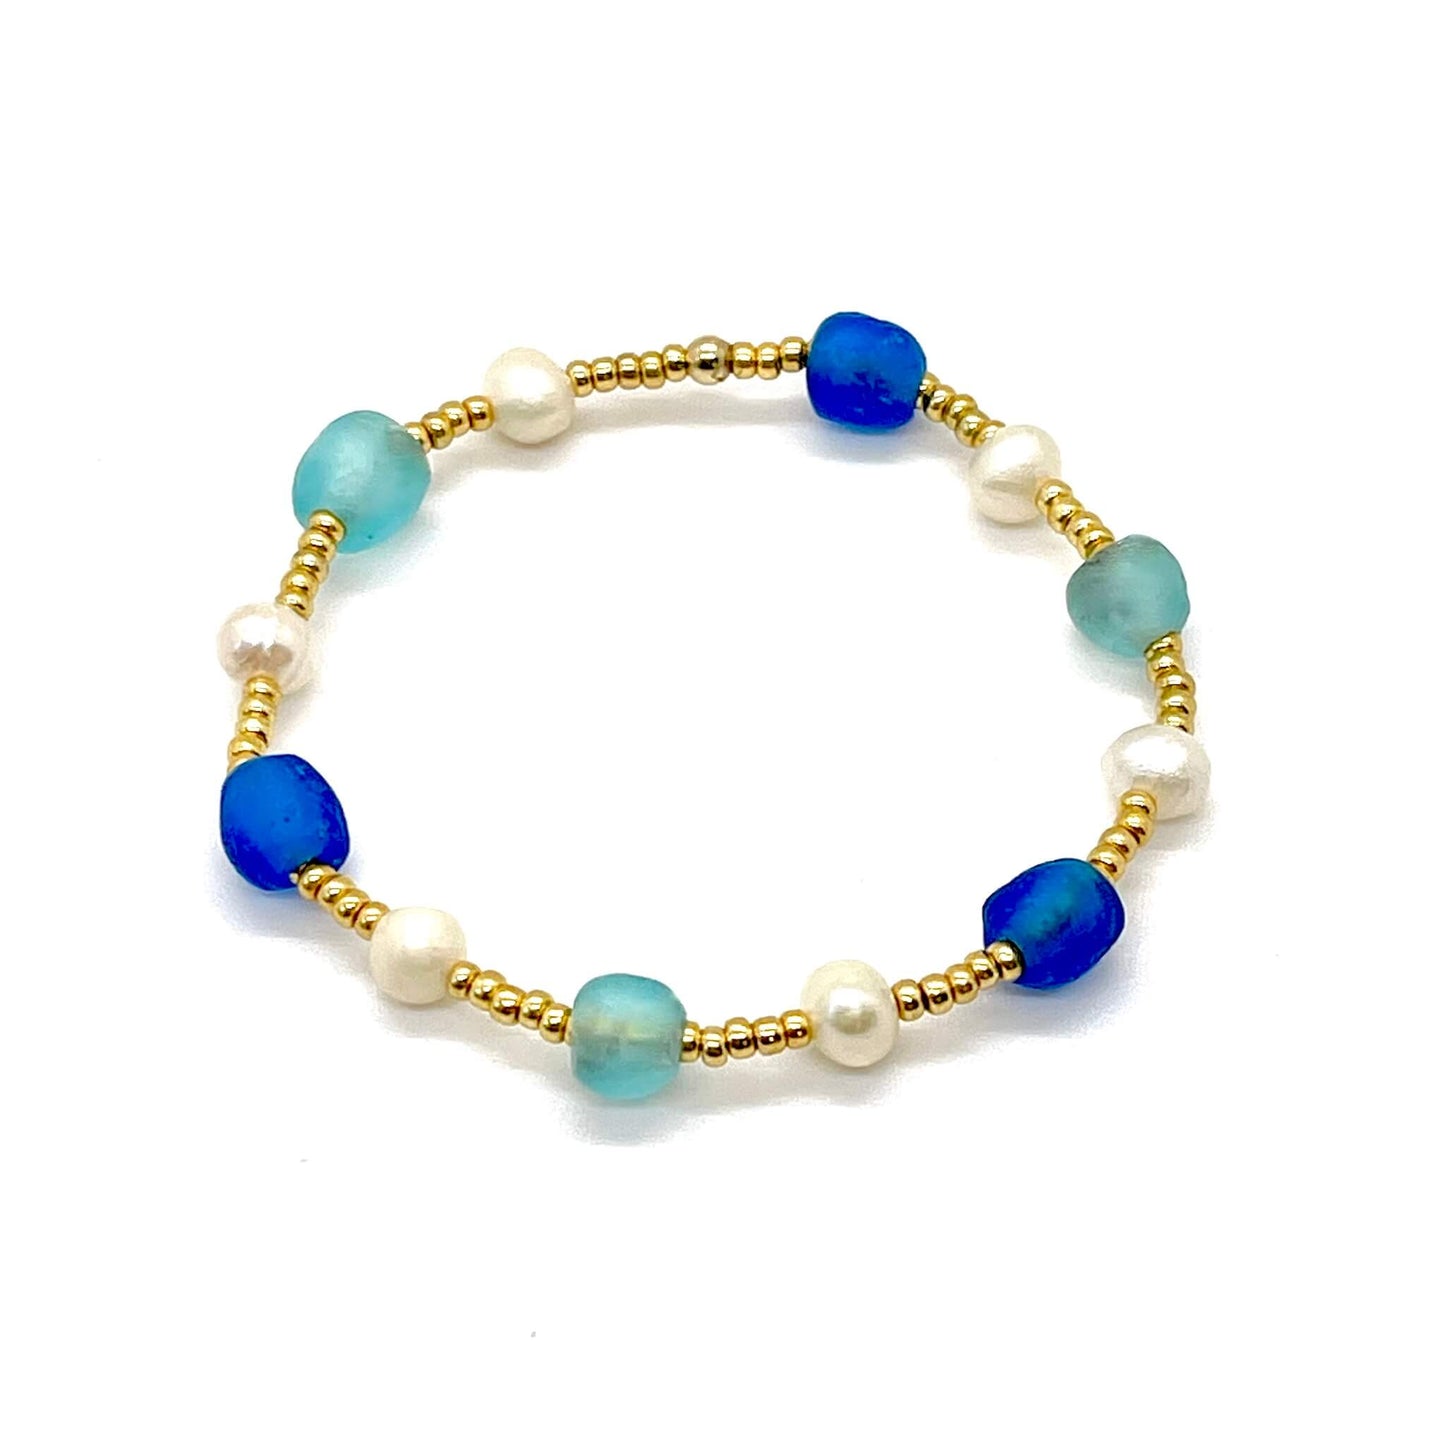 Sea glass bracelet with blue and aqua beach glass, freshwater pearls, and gold tone seed beads.